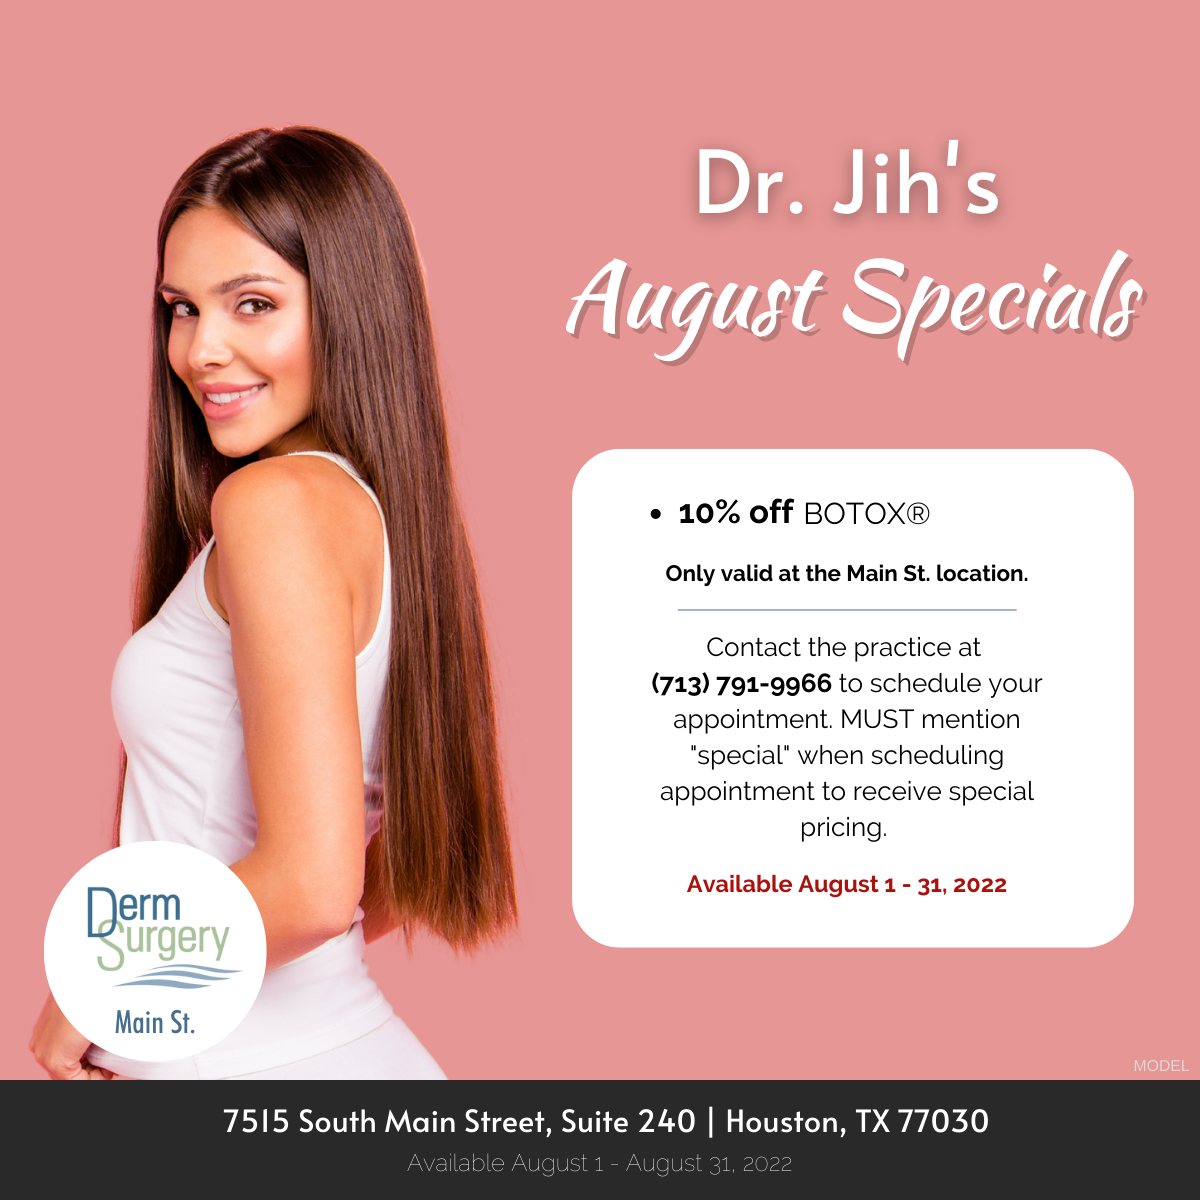 Dr. Jih's August Specials 2022